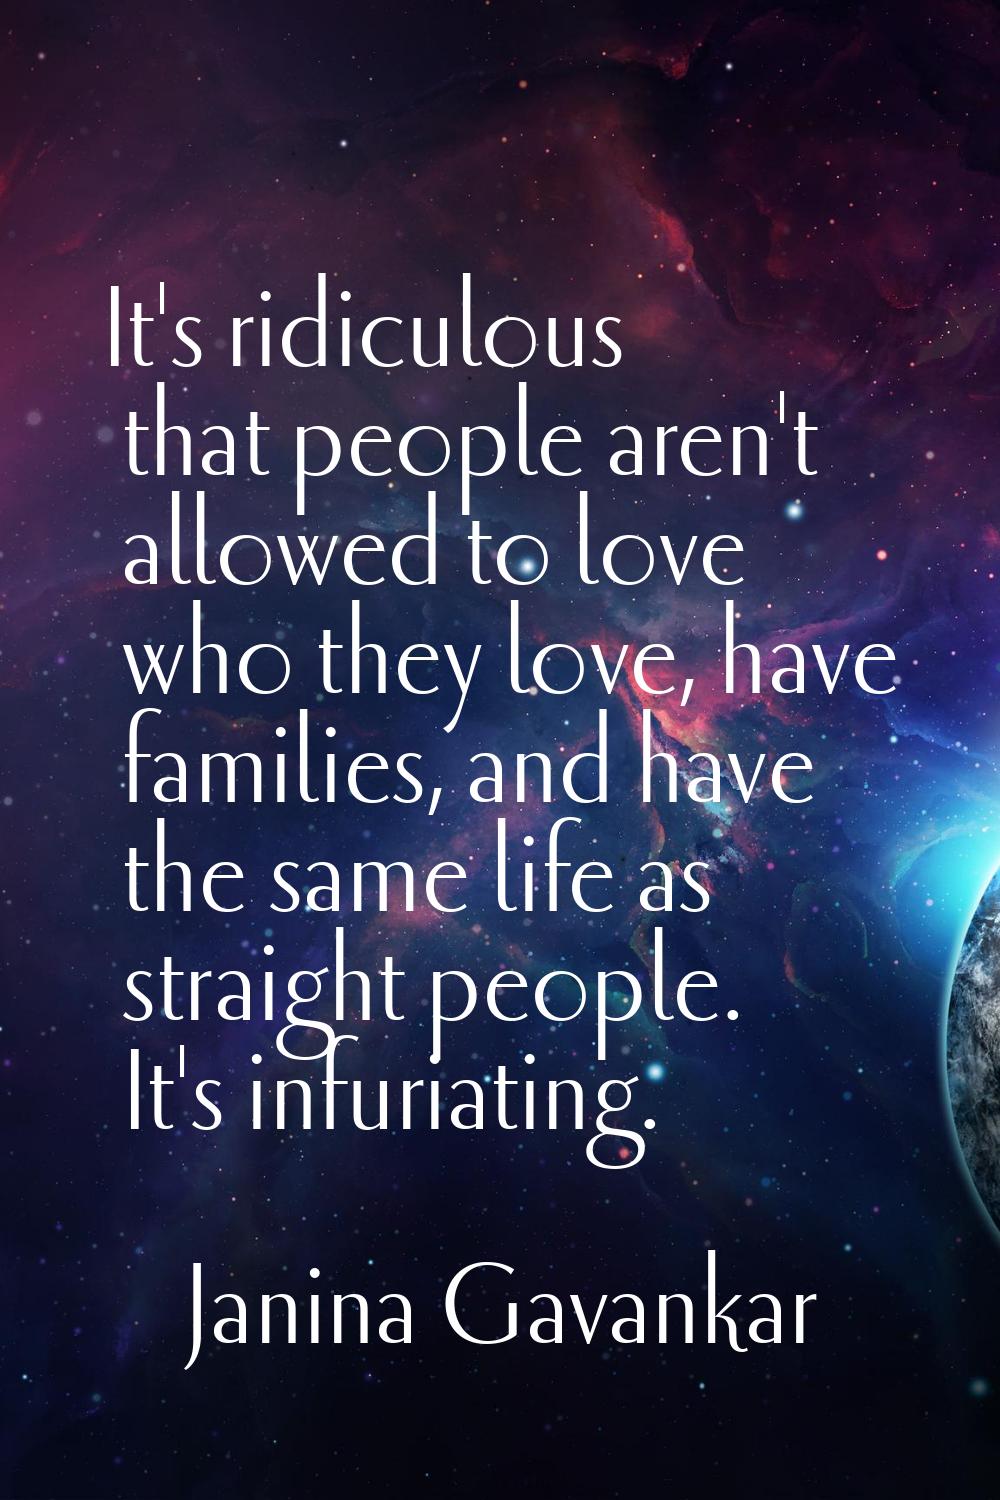 It's ridiculous that people aren't allowed to love who they love, have families, and have the same 